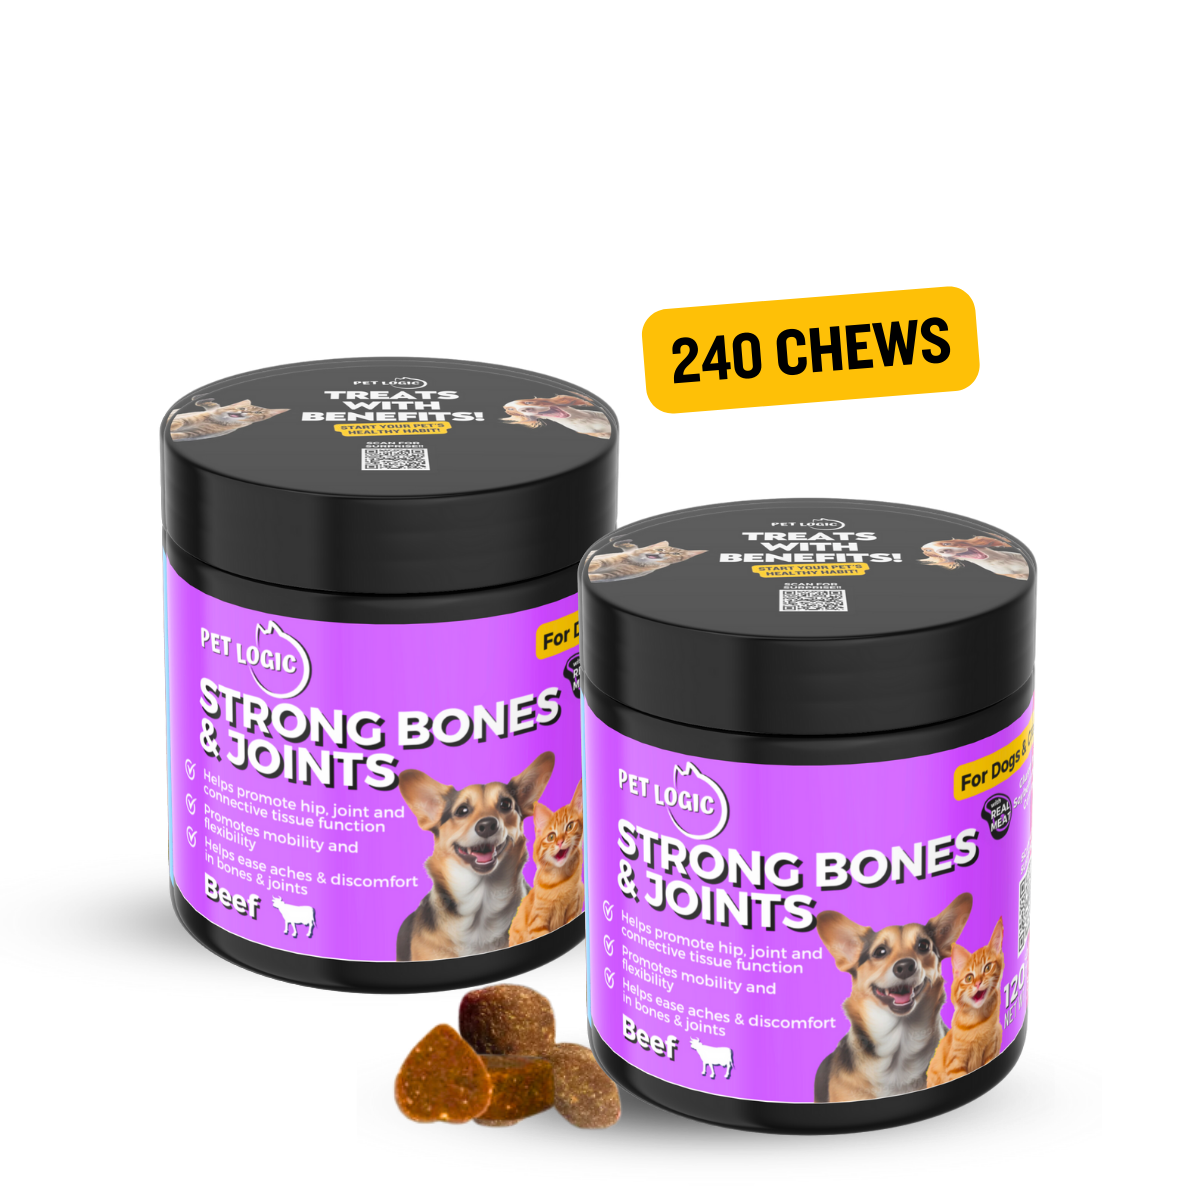 Pet Logic Strong Bones & Joints 240g Dog & Cat Treats Supplement Vitamins for Jolly Joints Support